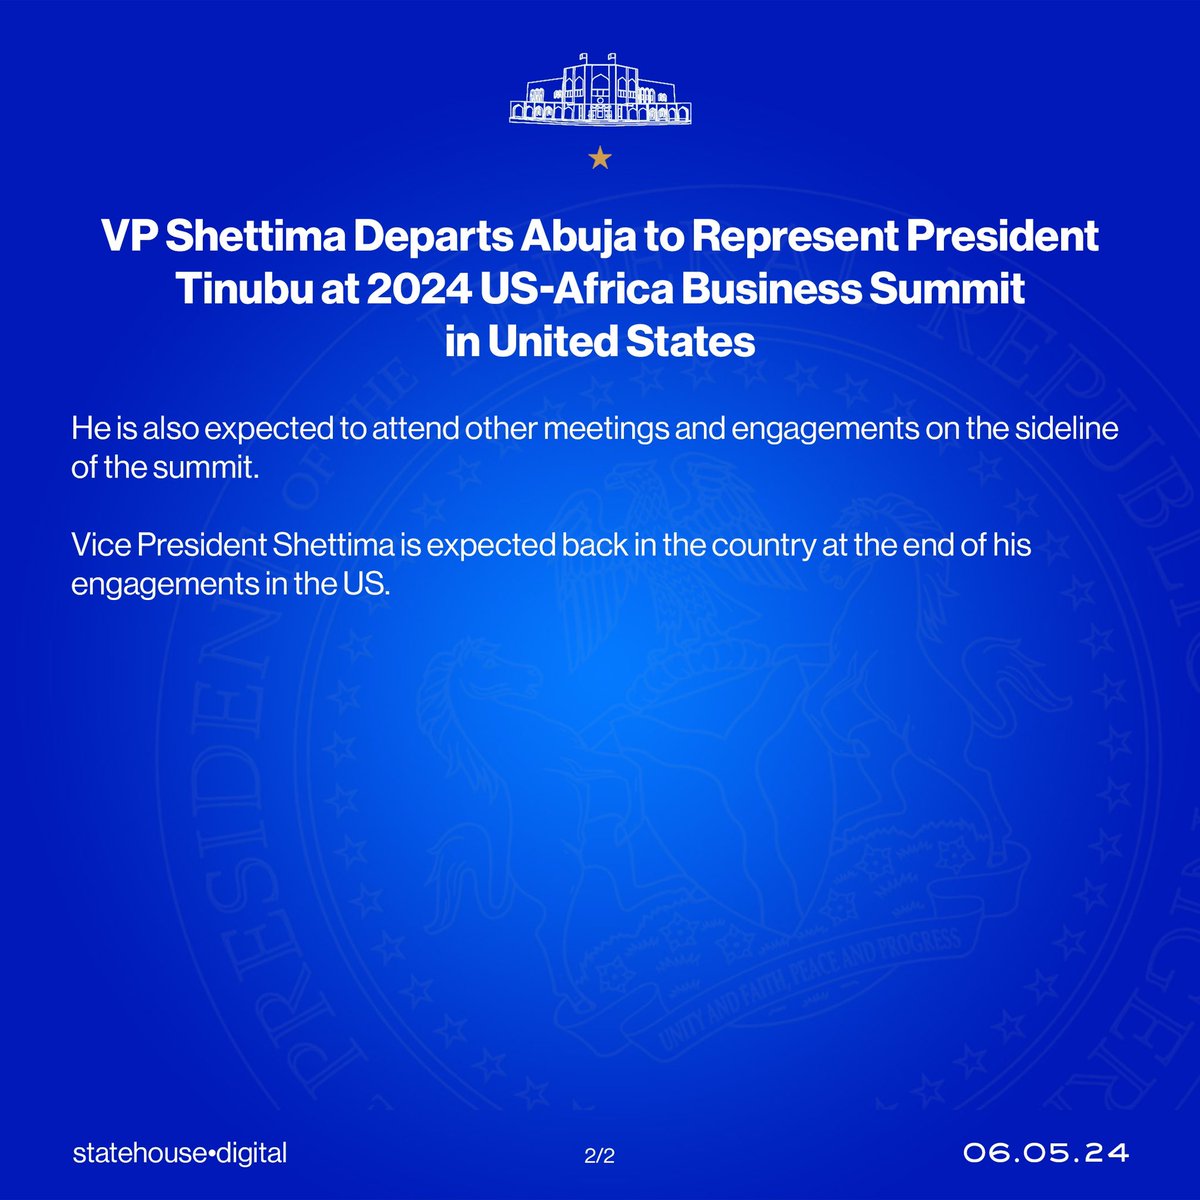 VP Shettima Departs Abuja to Represent President Tinubu at 2024 US-Africa Business Summit in United States